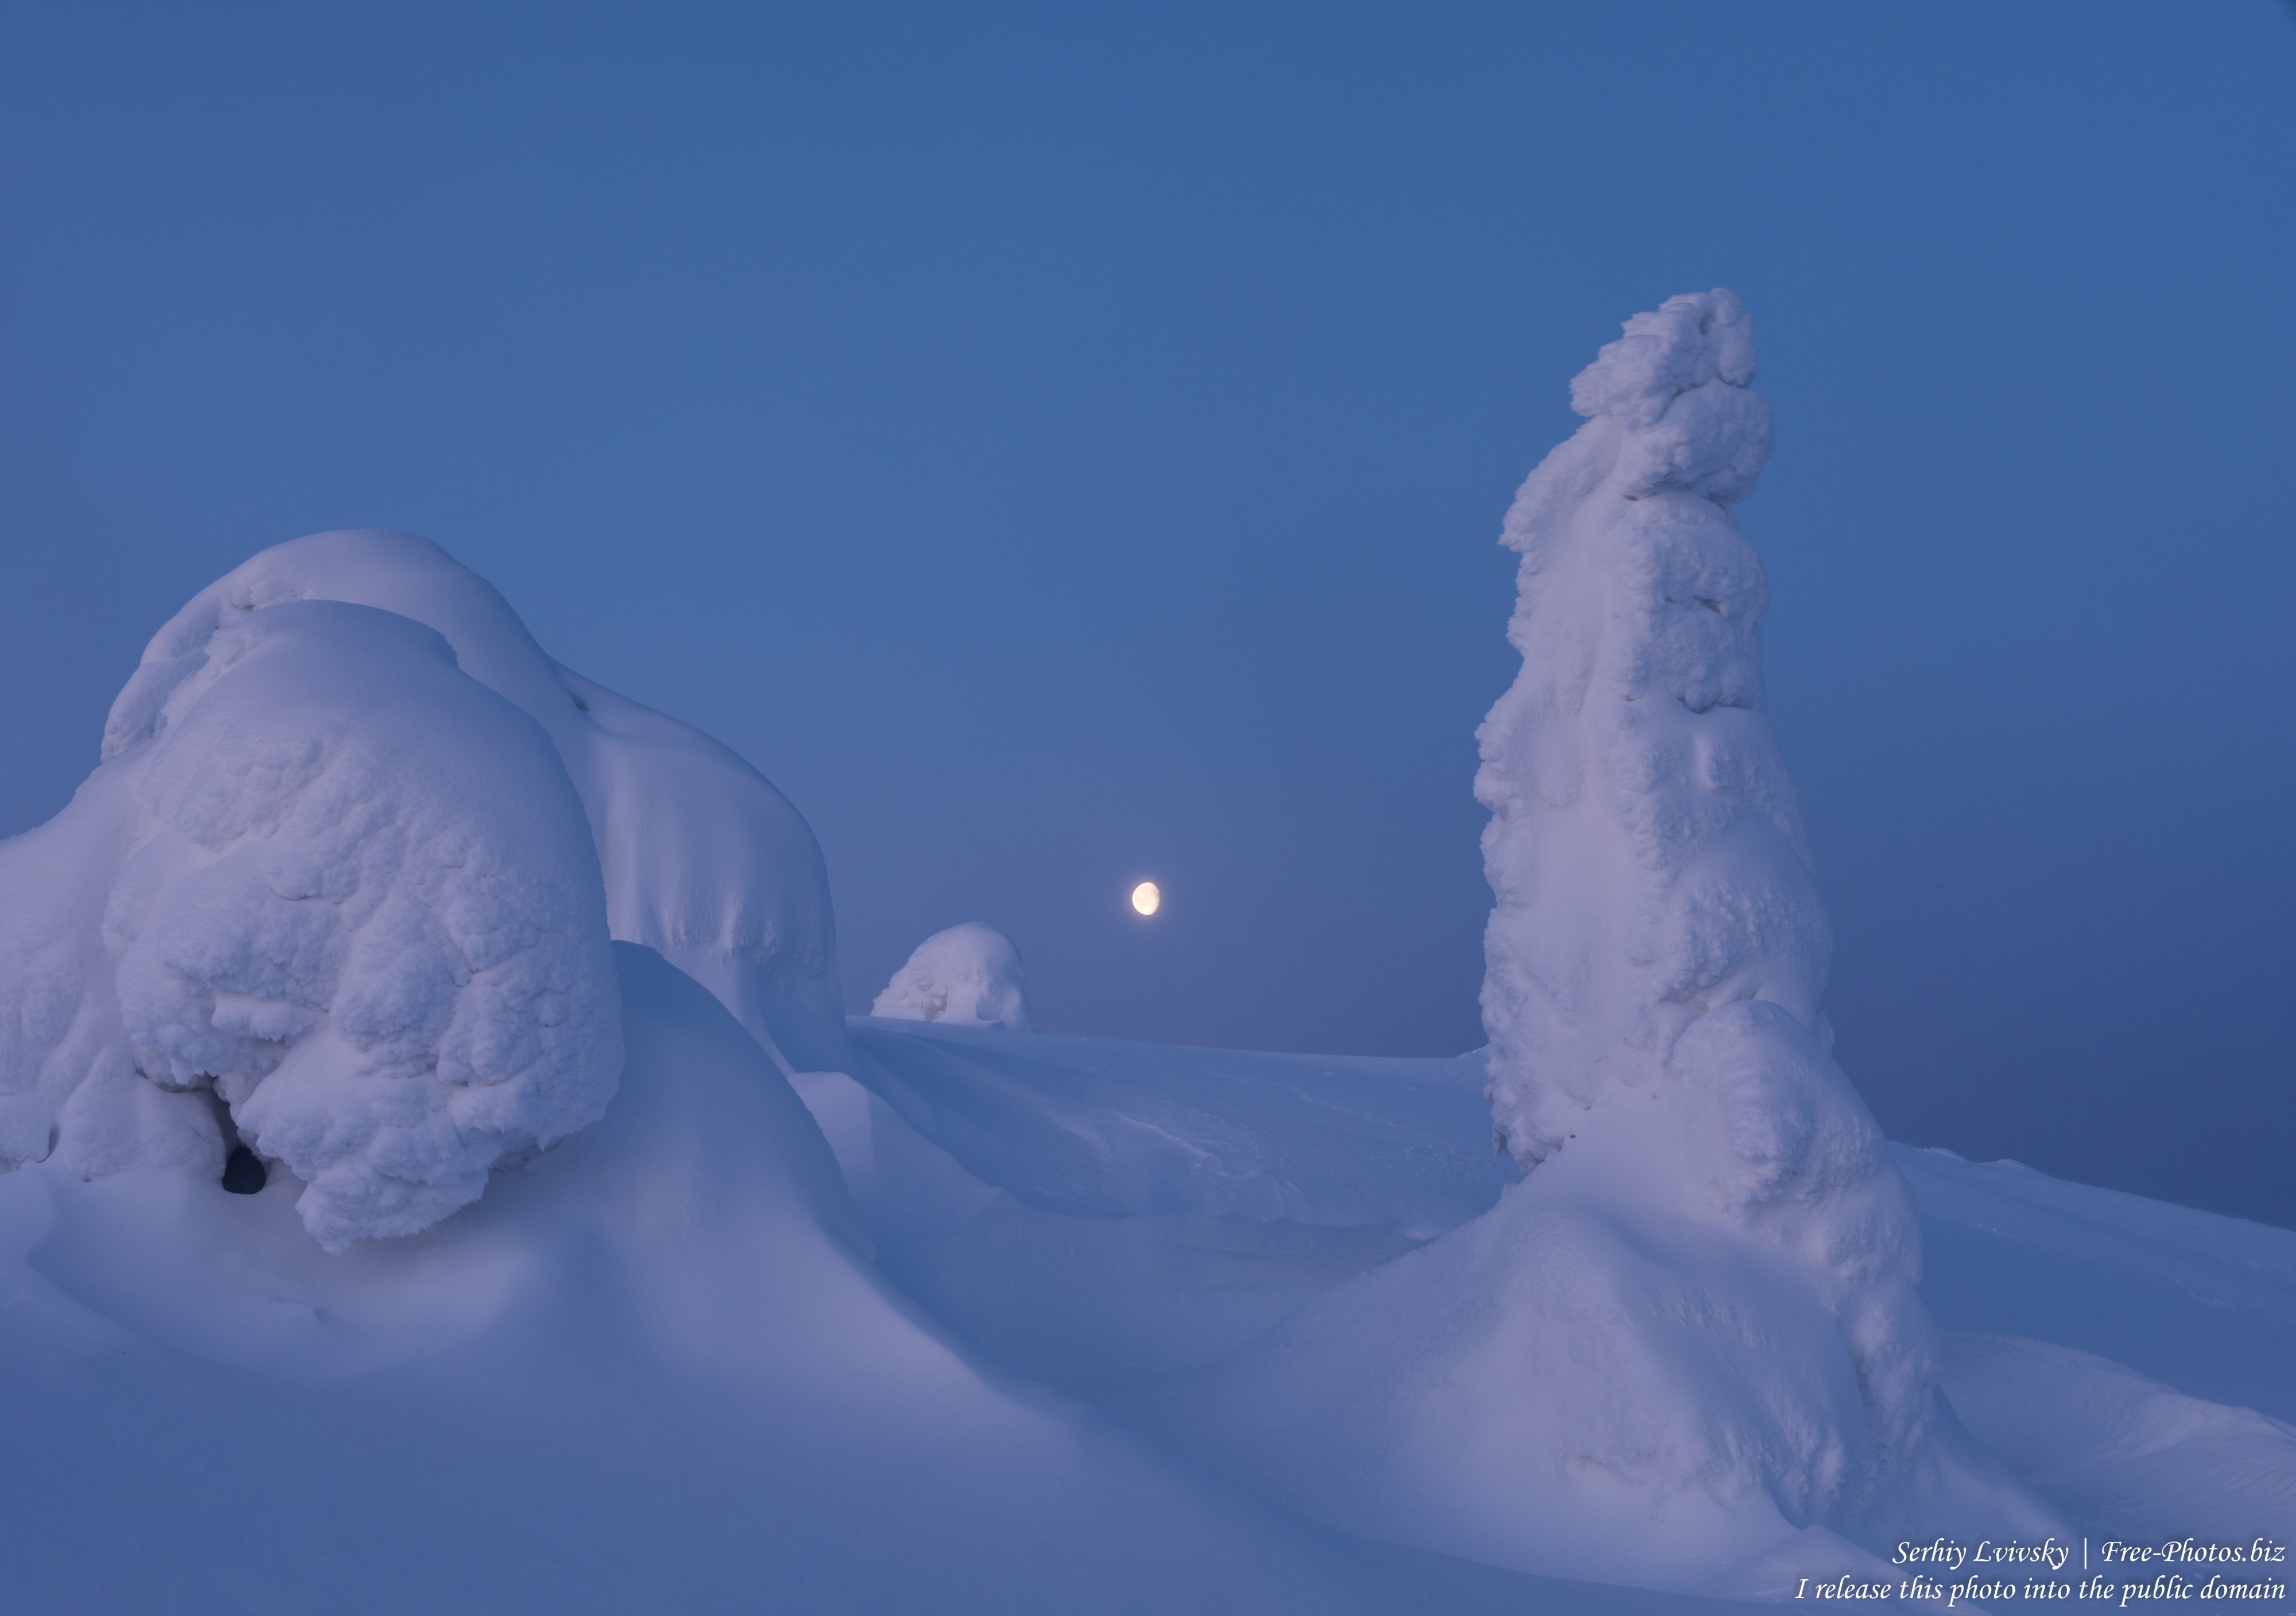 Valtavaara, Finland, photographed in January 2020 by Serhiy Lvivsky, picture 55